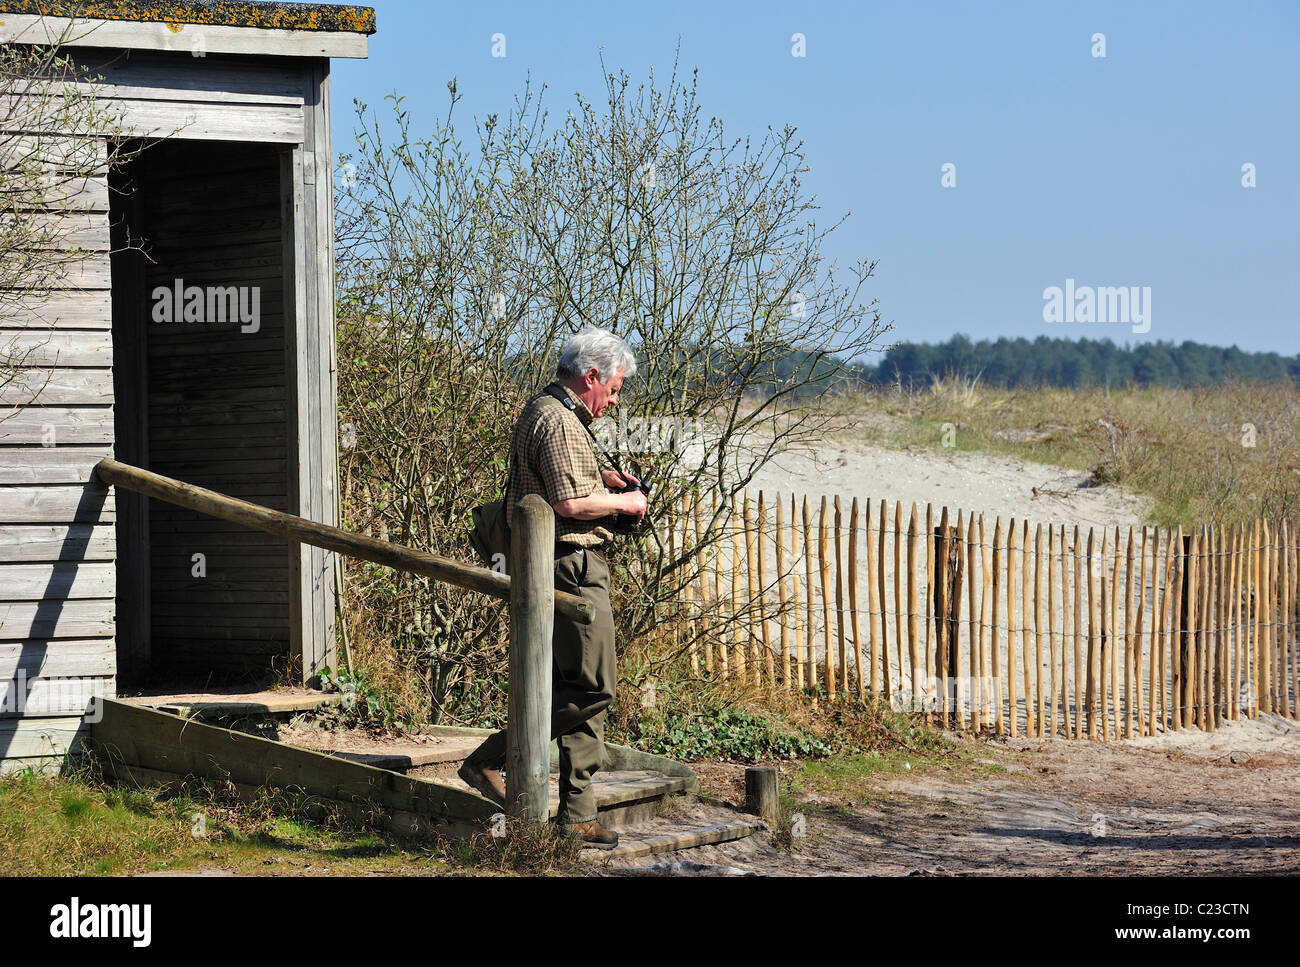 Birdwatcher with binocular leaving hide at the nature reserve Parc du Marquenterre at the Bay of the Somme, Picardy, France Stock Photo